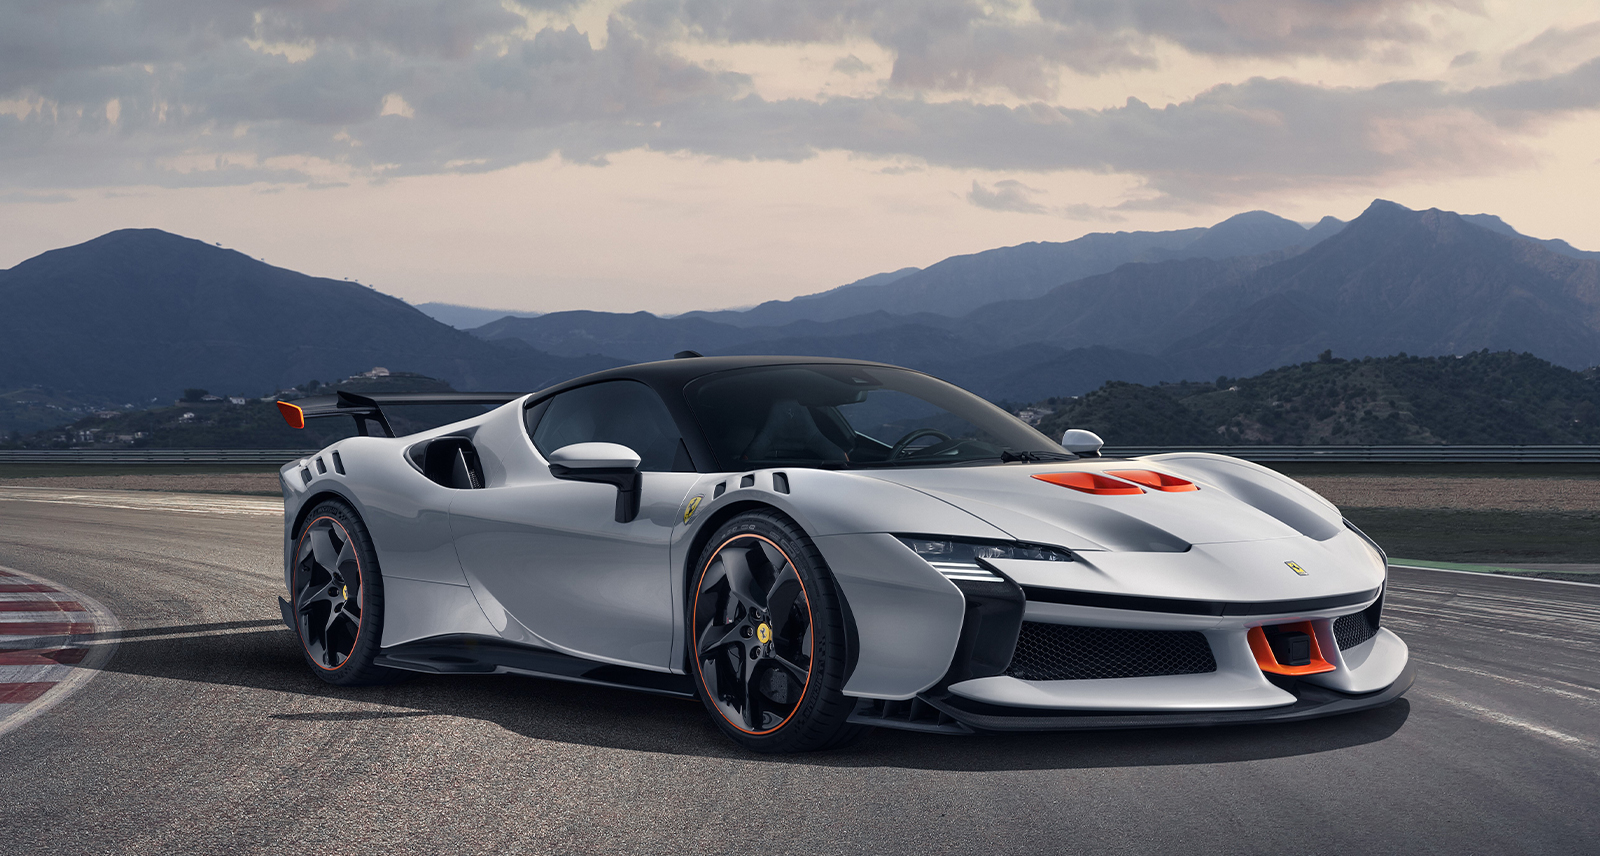 White Ferrari SF90 XX car on a racetrack with mountains in the background